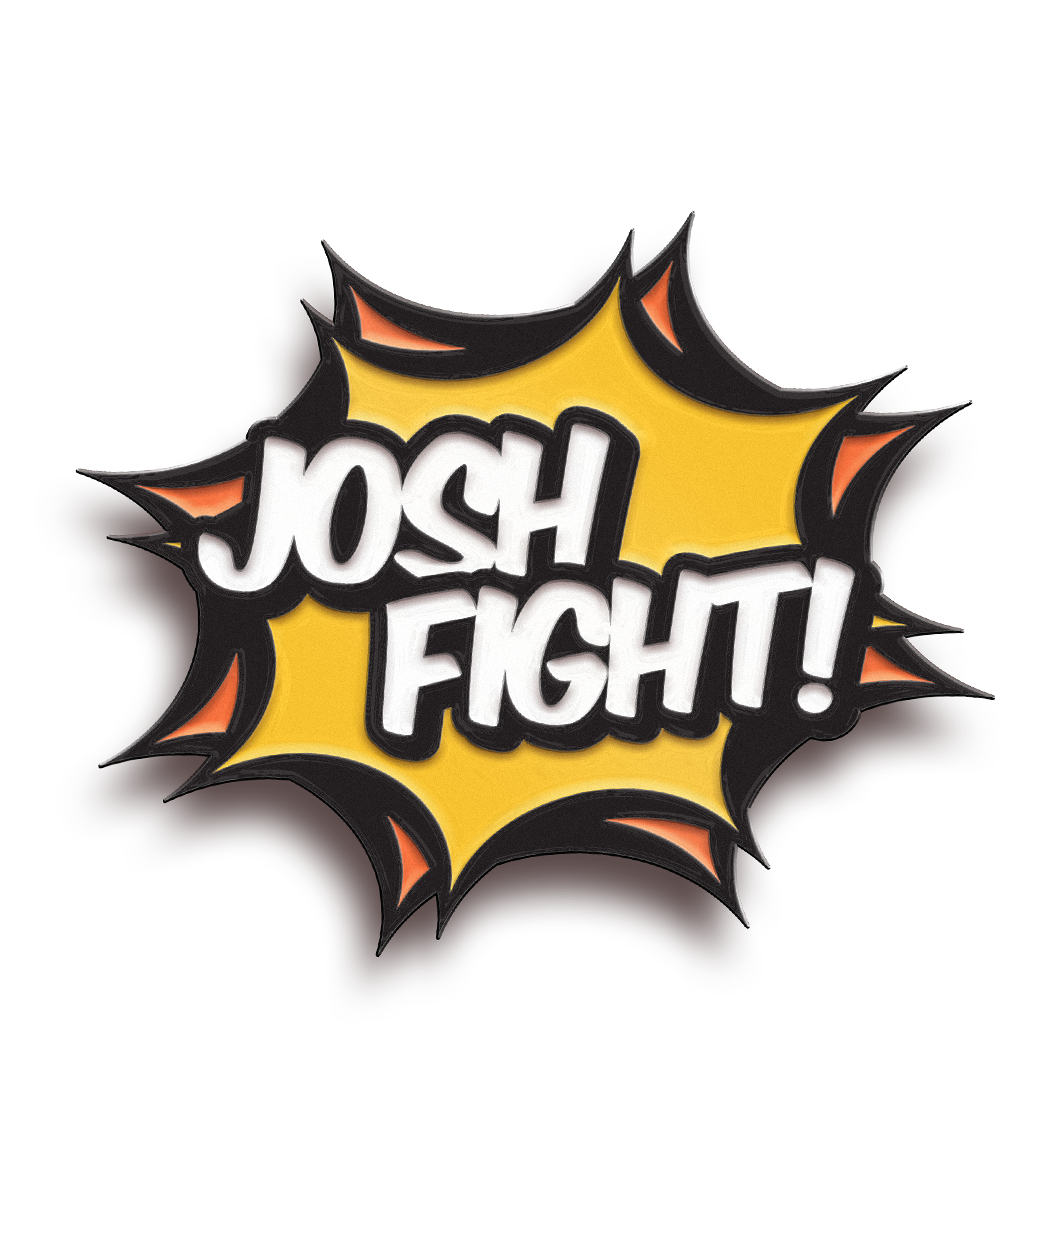 Comic bubble pow pin with the words "Josh Fight!" in white. Pin color is yellow overlaying orange.